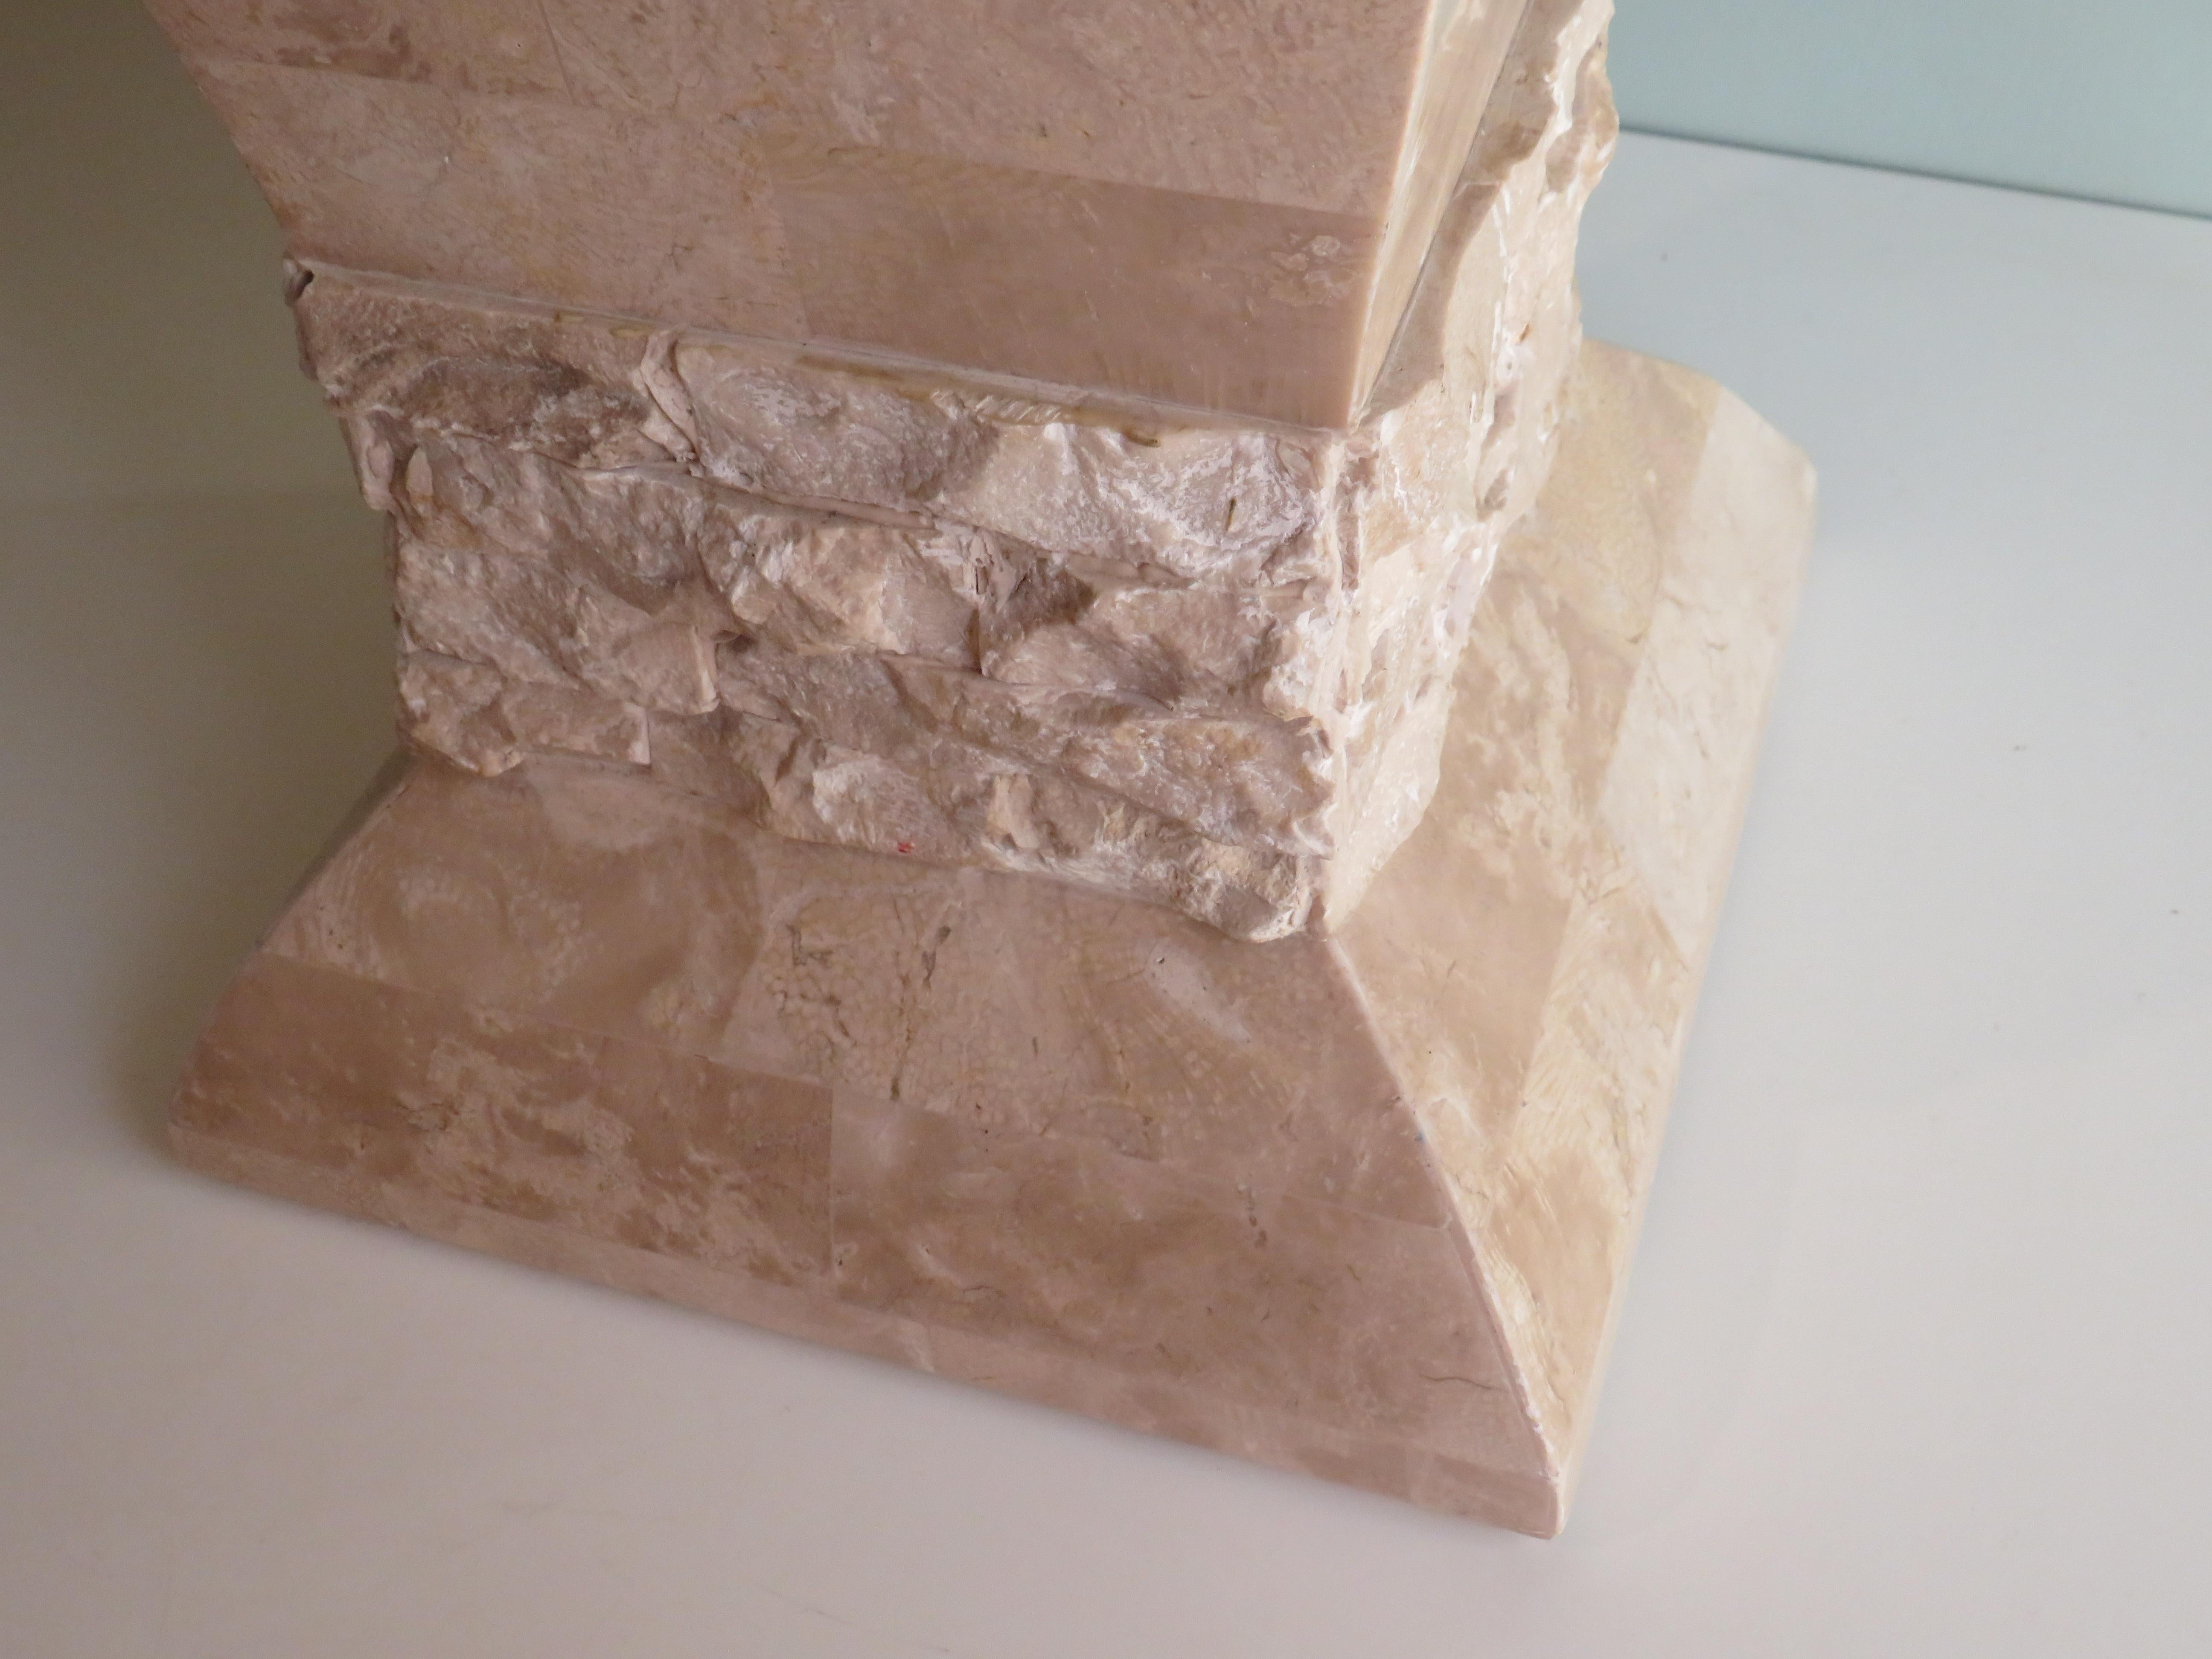 Hollywood Regency Style Travertine Column, Pedestal, Italy, 1970s For Sale 1